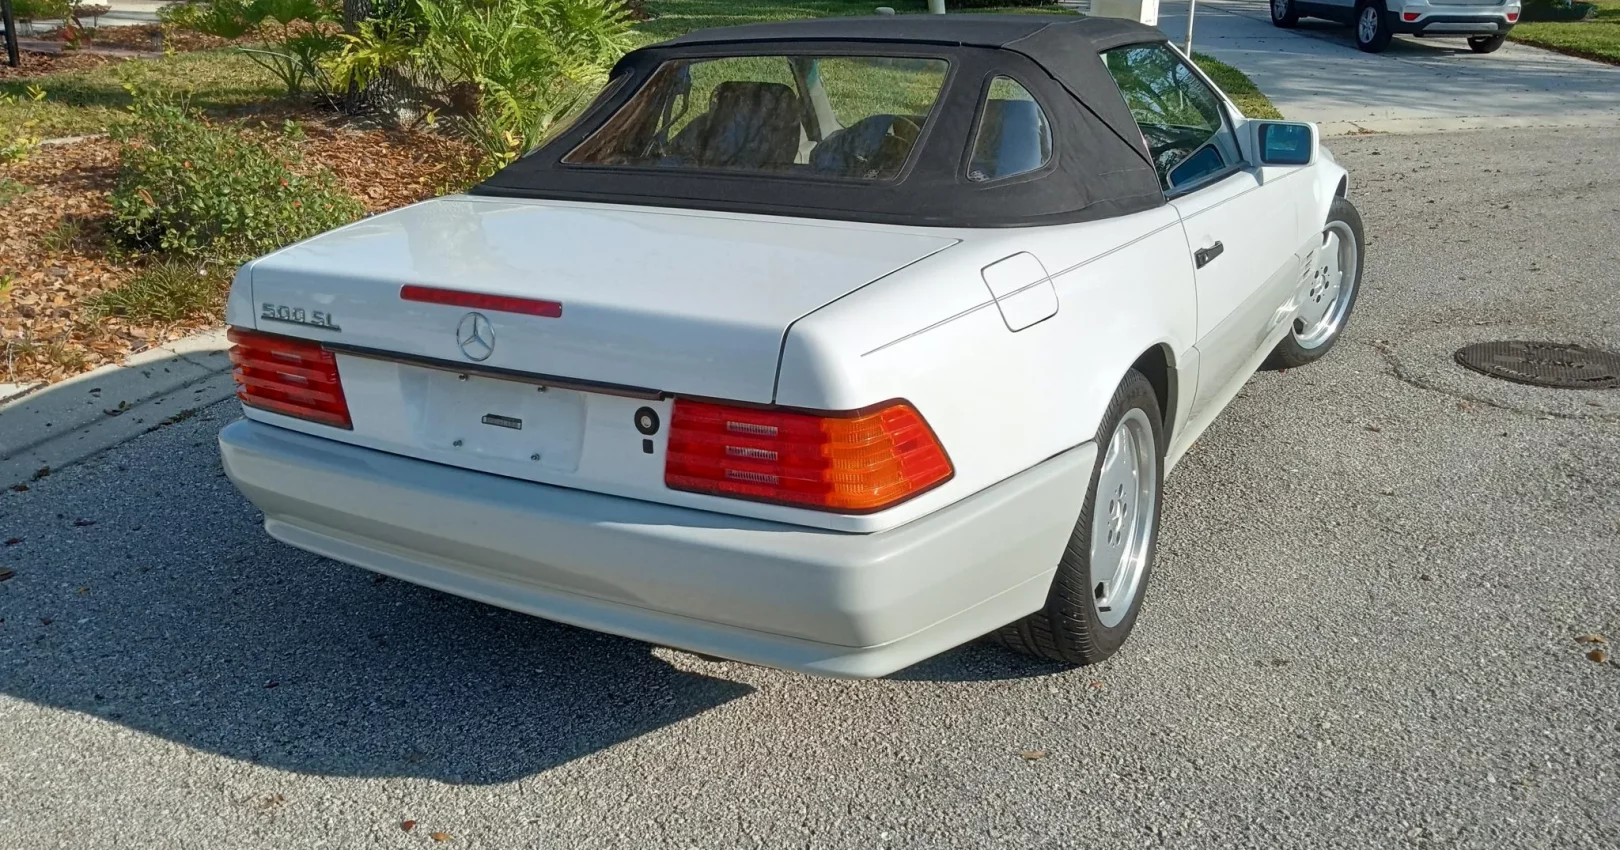 1991_mercedes-benz_500sl_IMG_20230301_090518974_HDR-82599-scaled